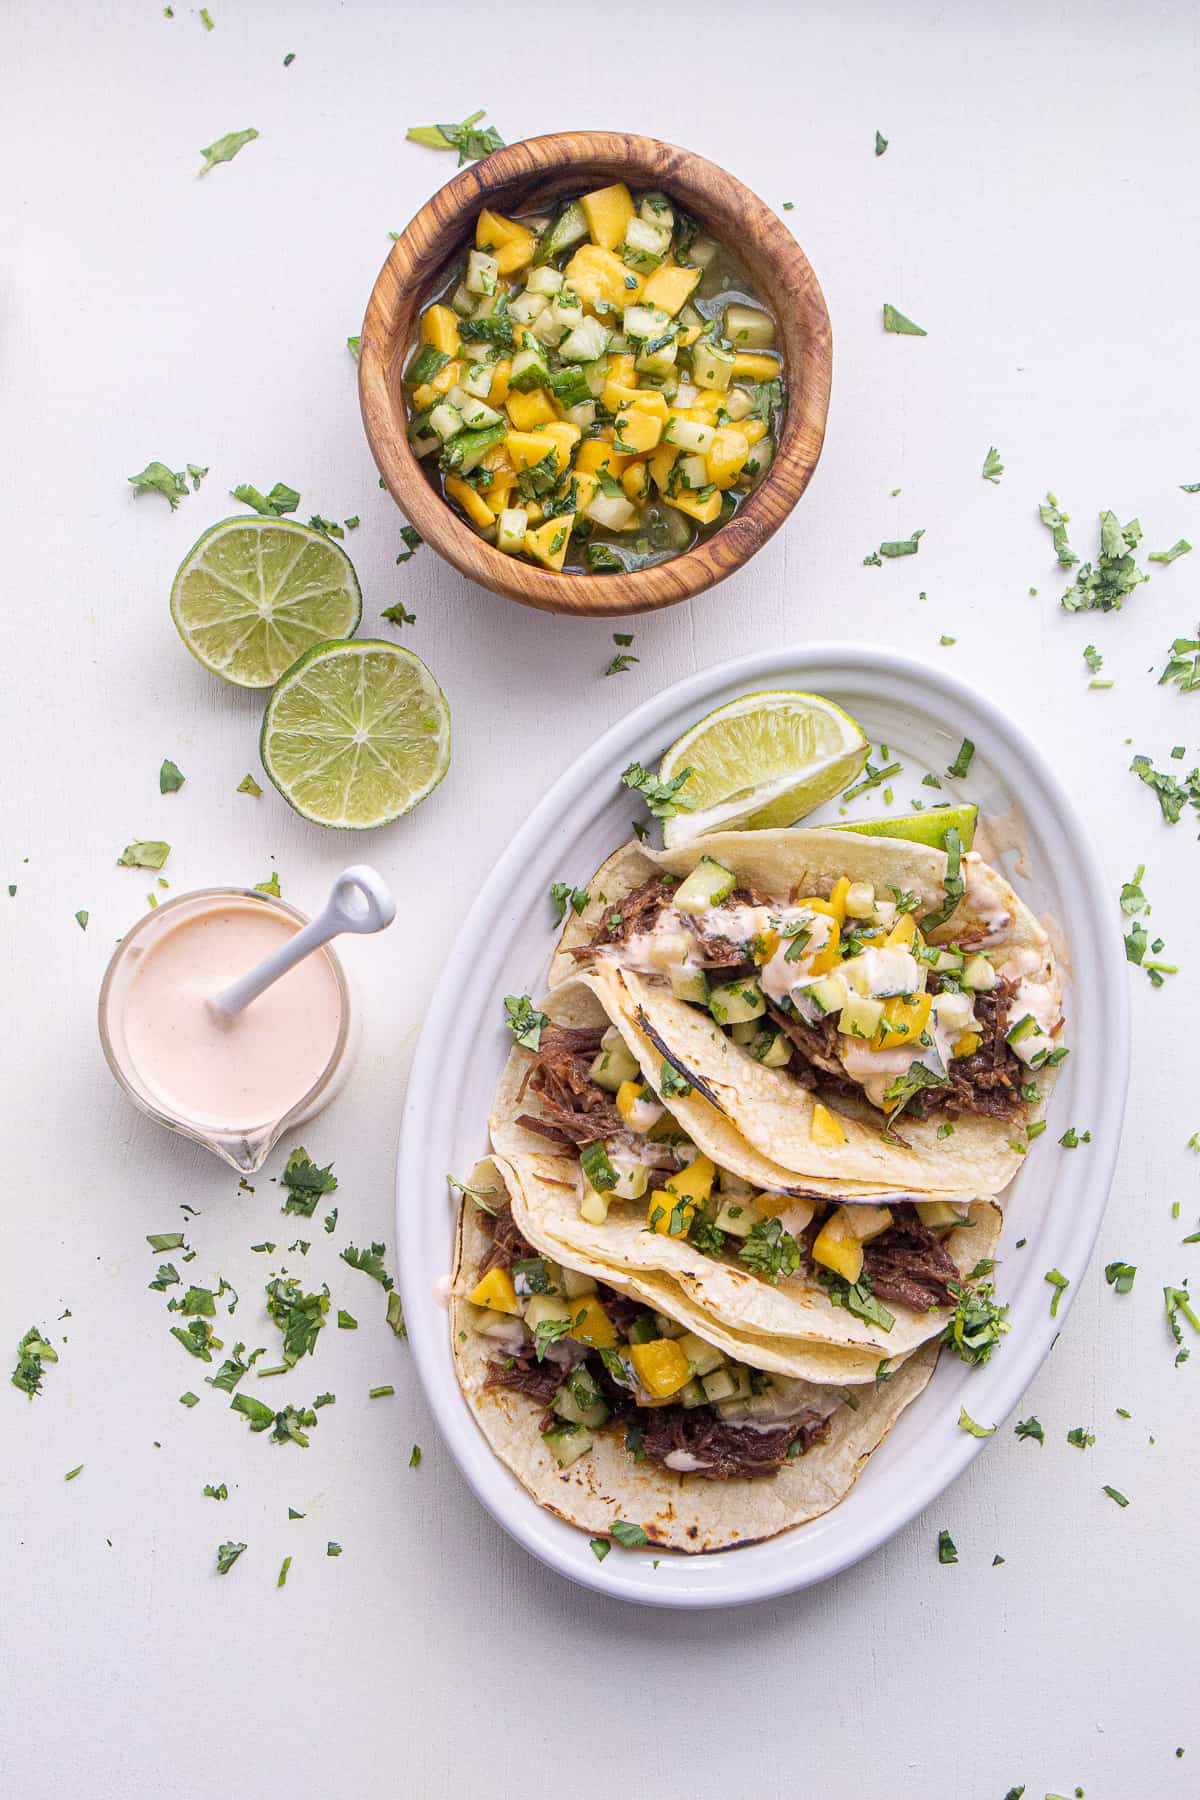 An oval plate of the tacos is sprinkled with cilantro and placed next to a small bowl of sriracha mayo, sliced limes, and mango cucumber salad.